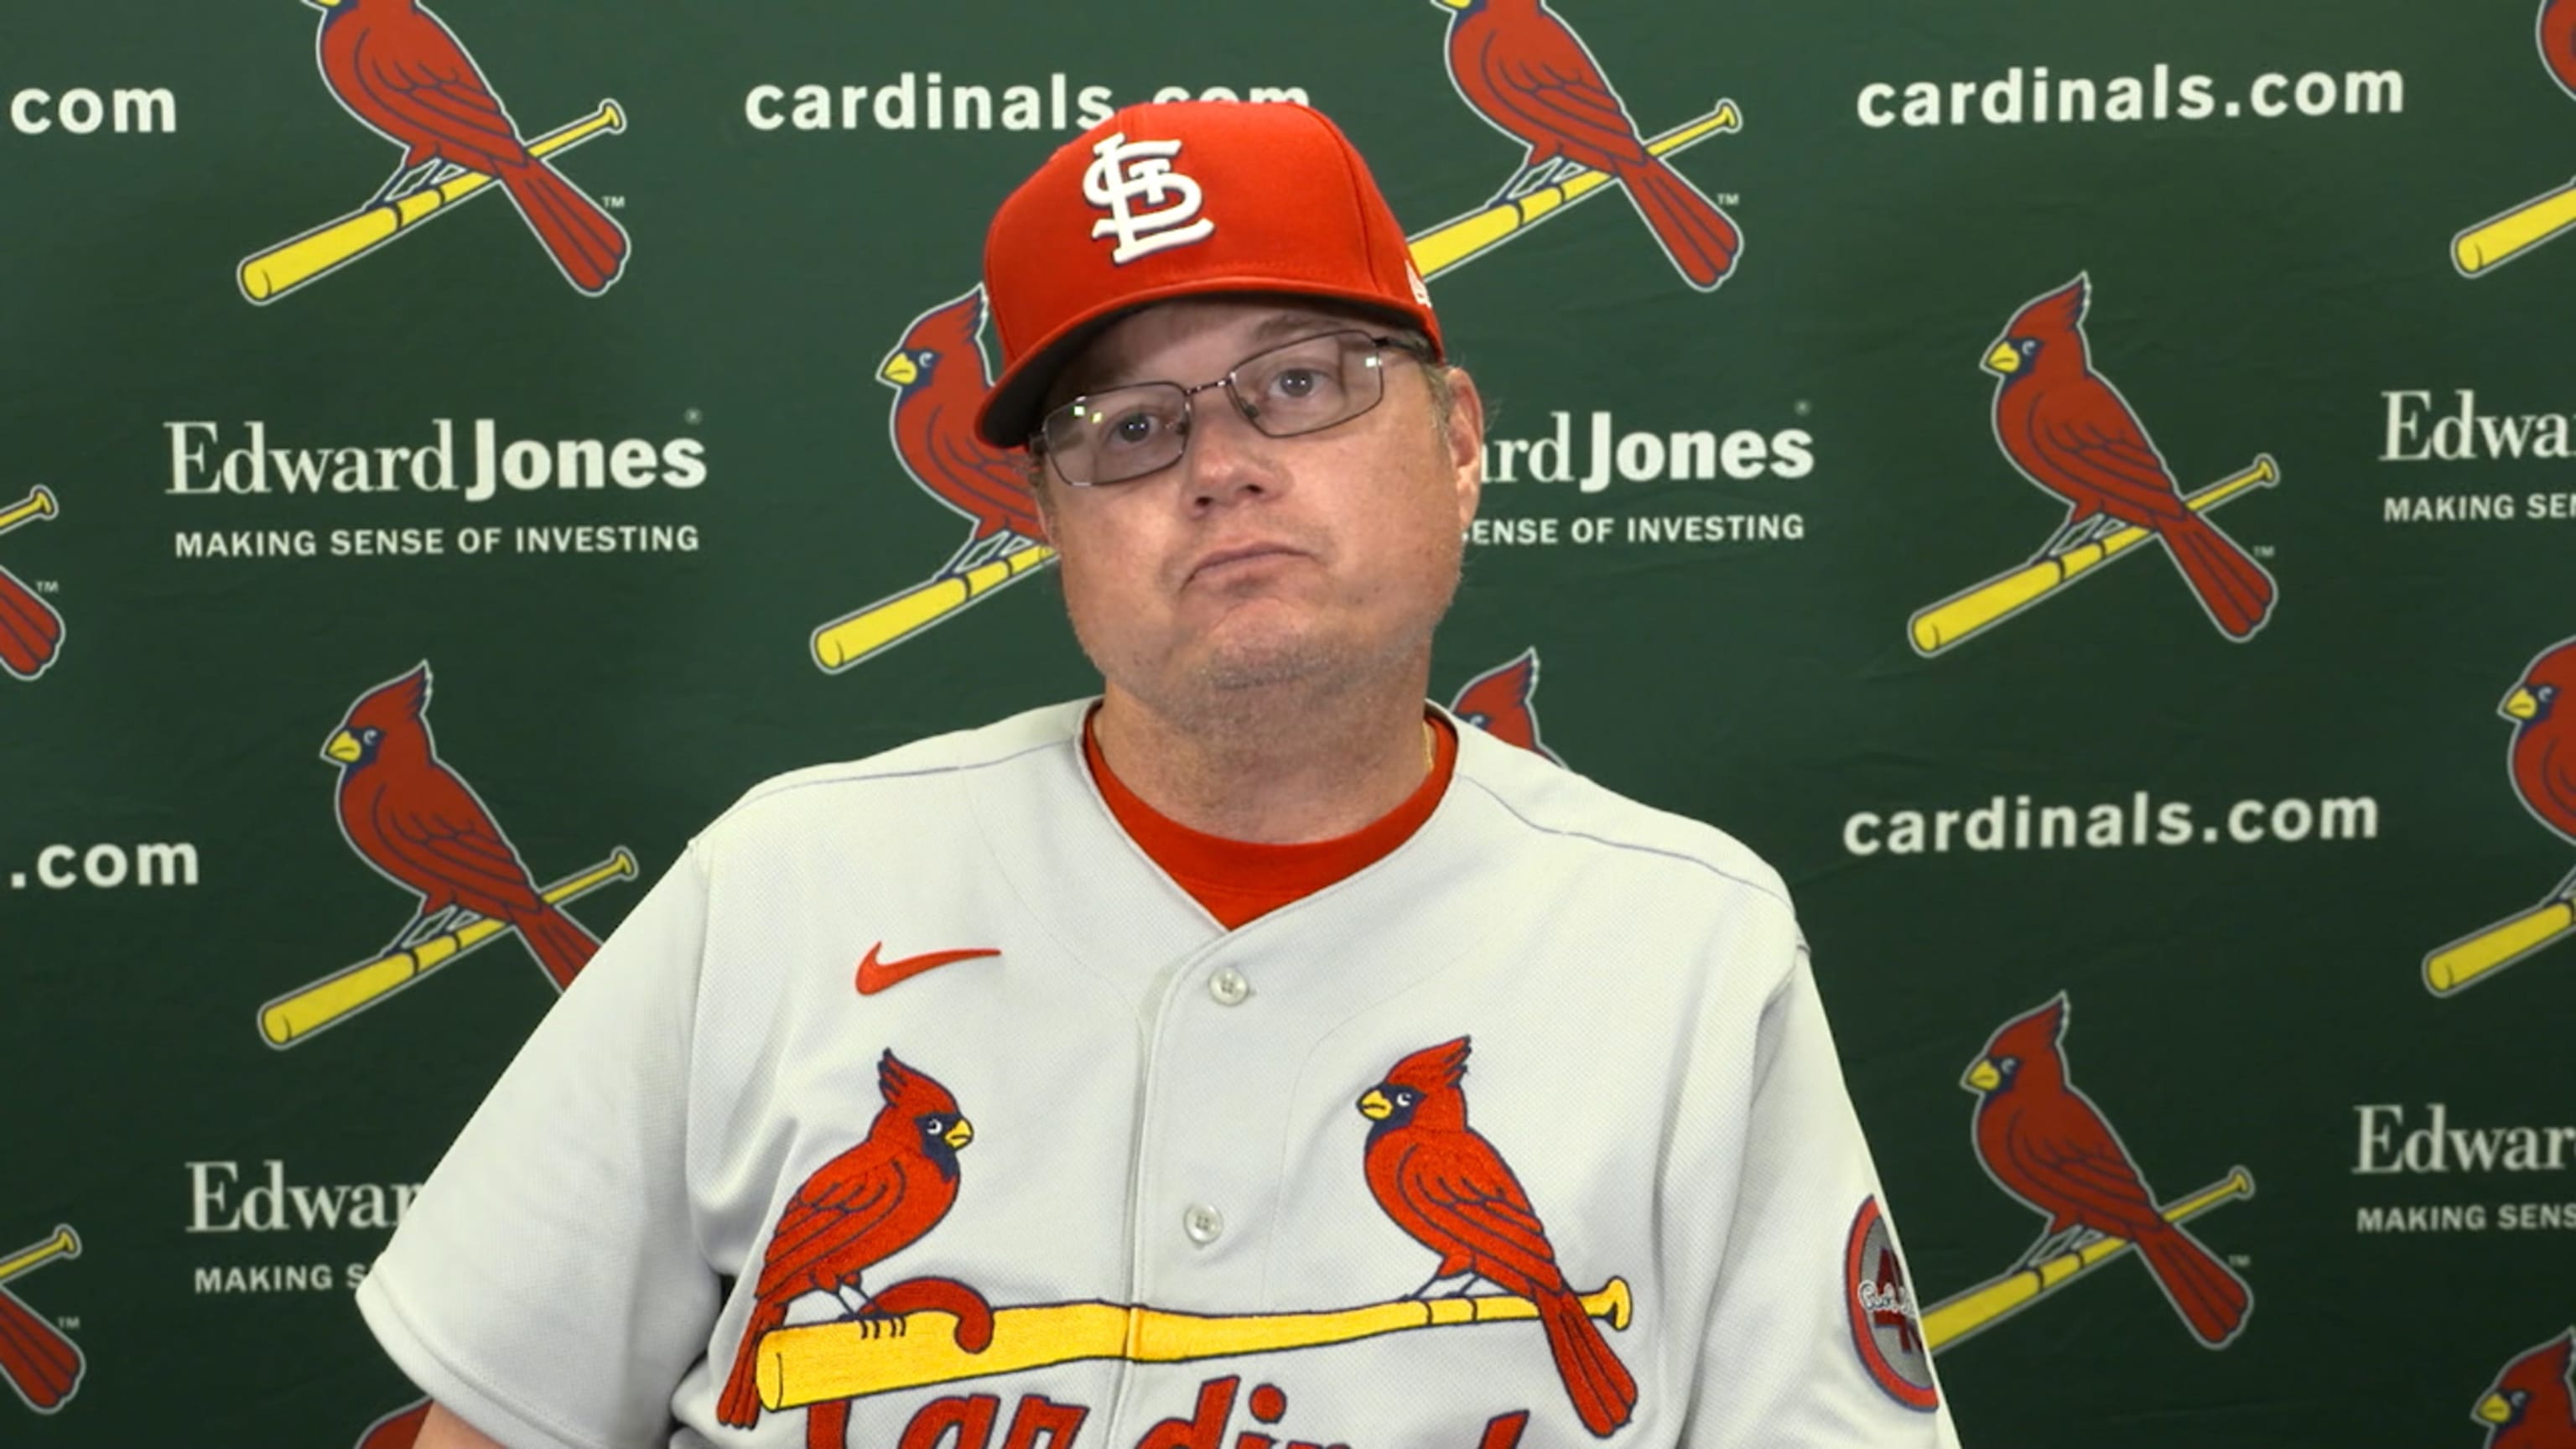 Gordo: Cardinals' promising prospects ignite hope, fuel path for